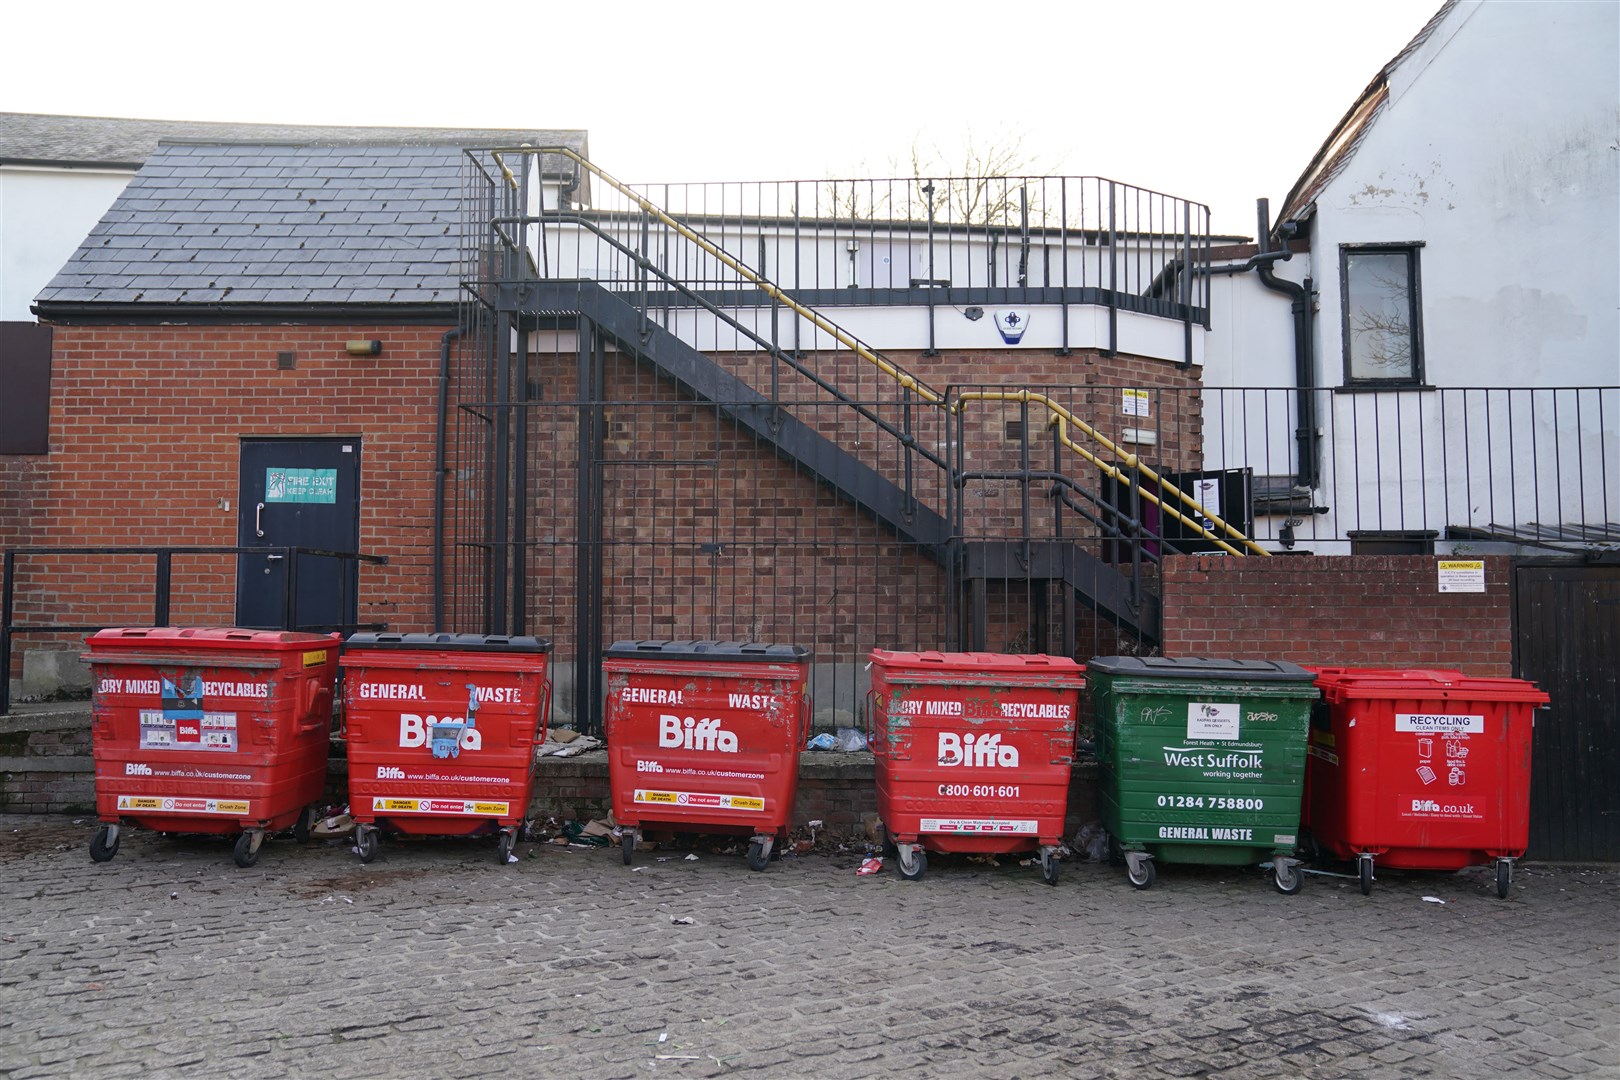 The bins in a service area in Bury St Edmunds, Suffolk, pictured in 2022 (Joe Giddens/PA)